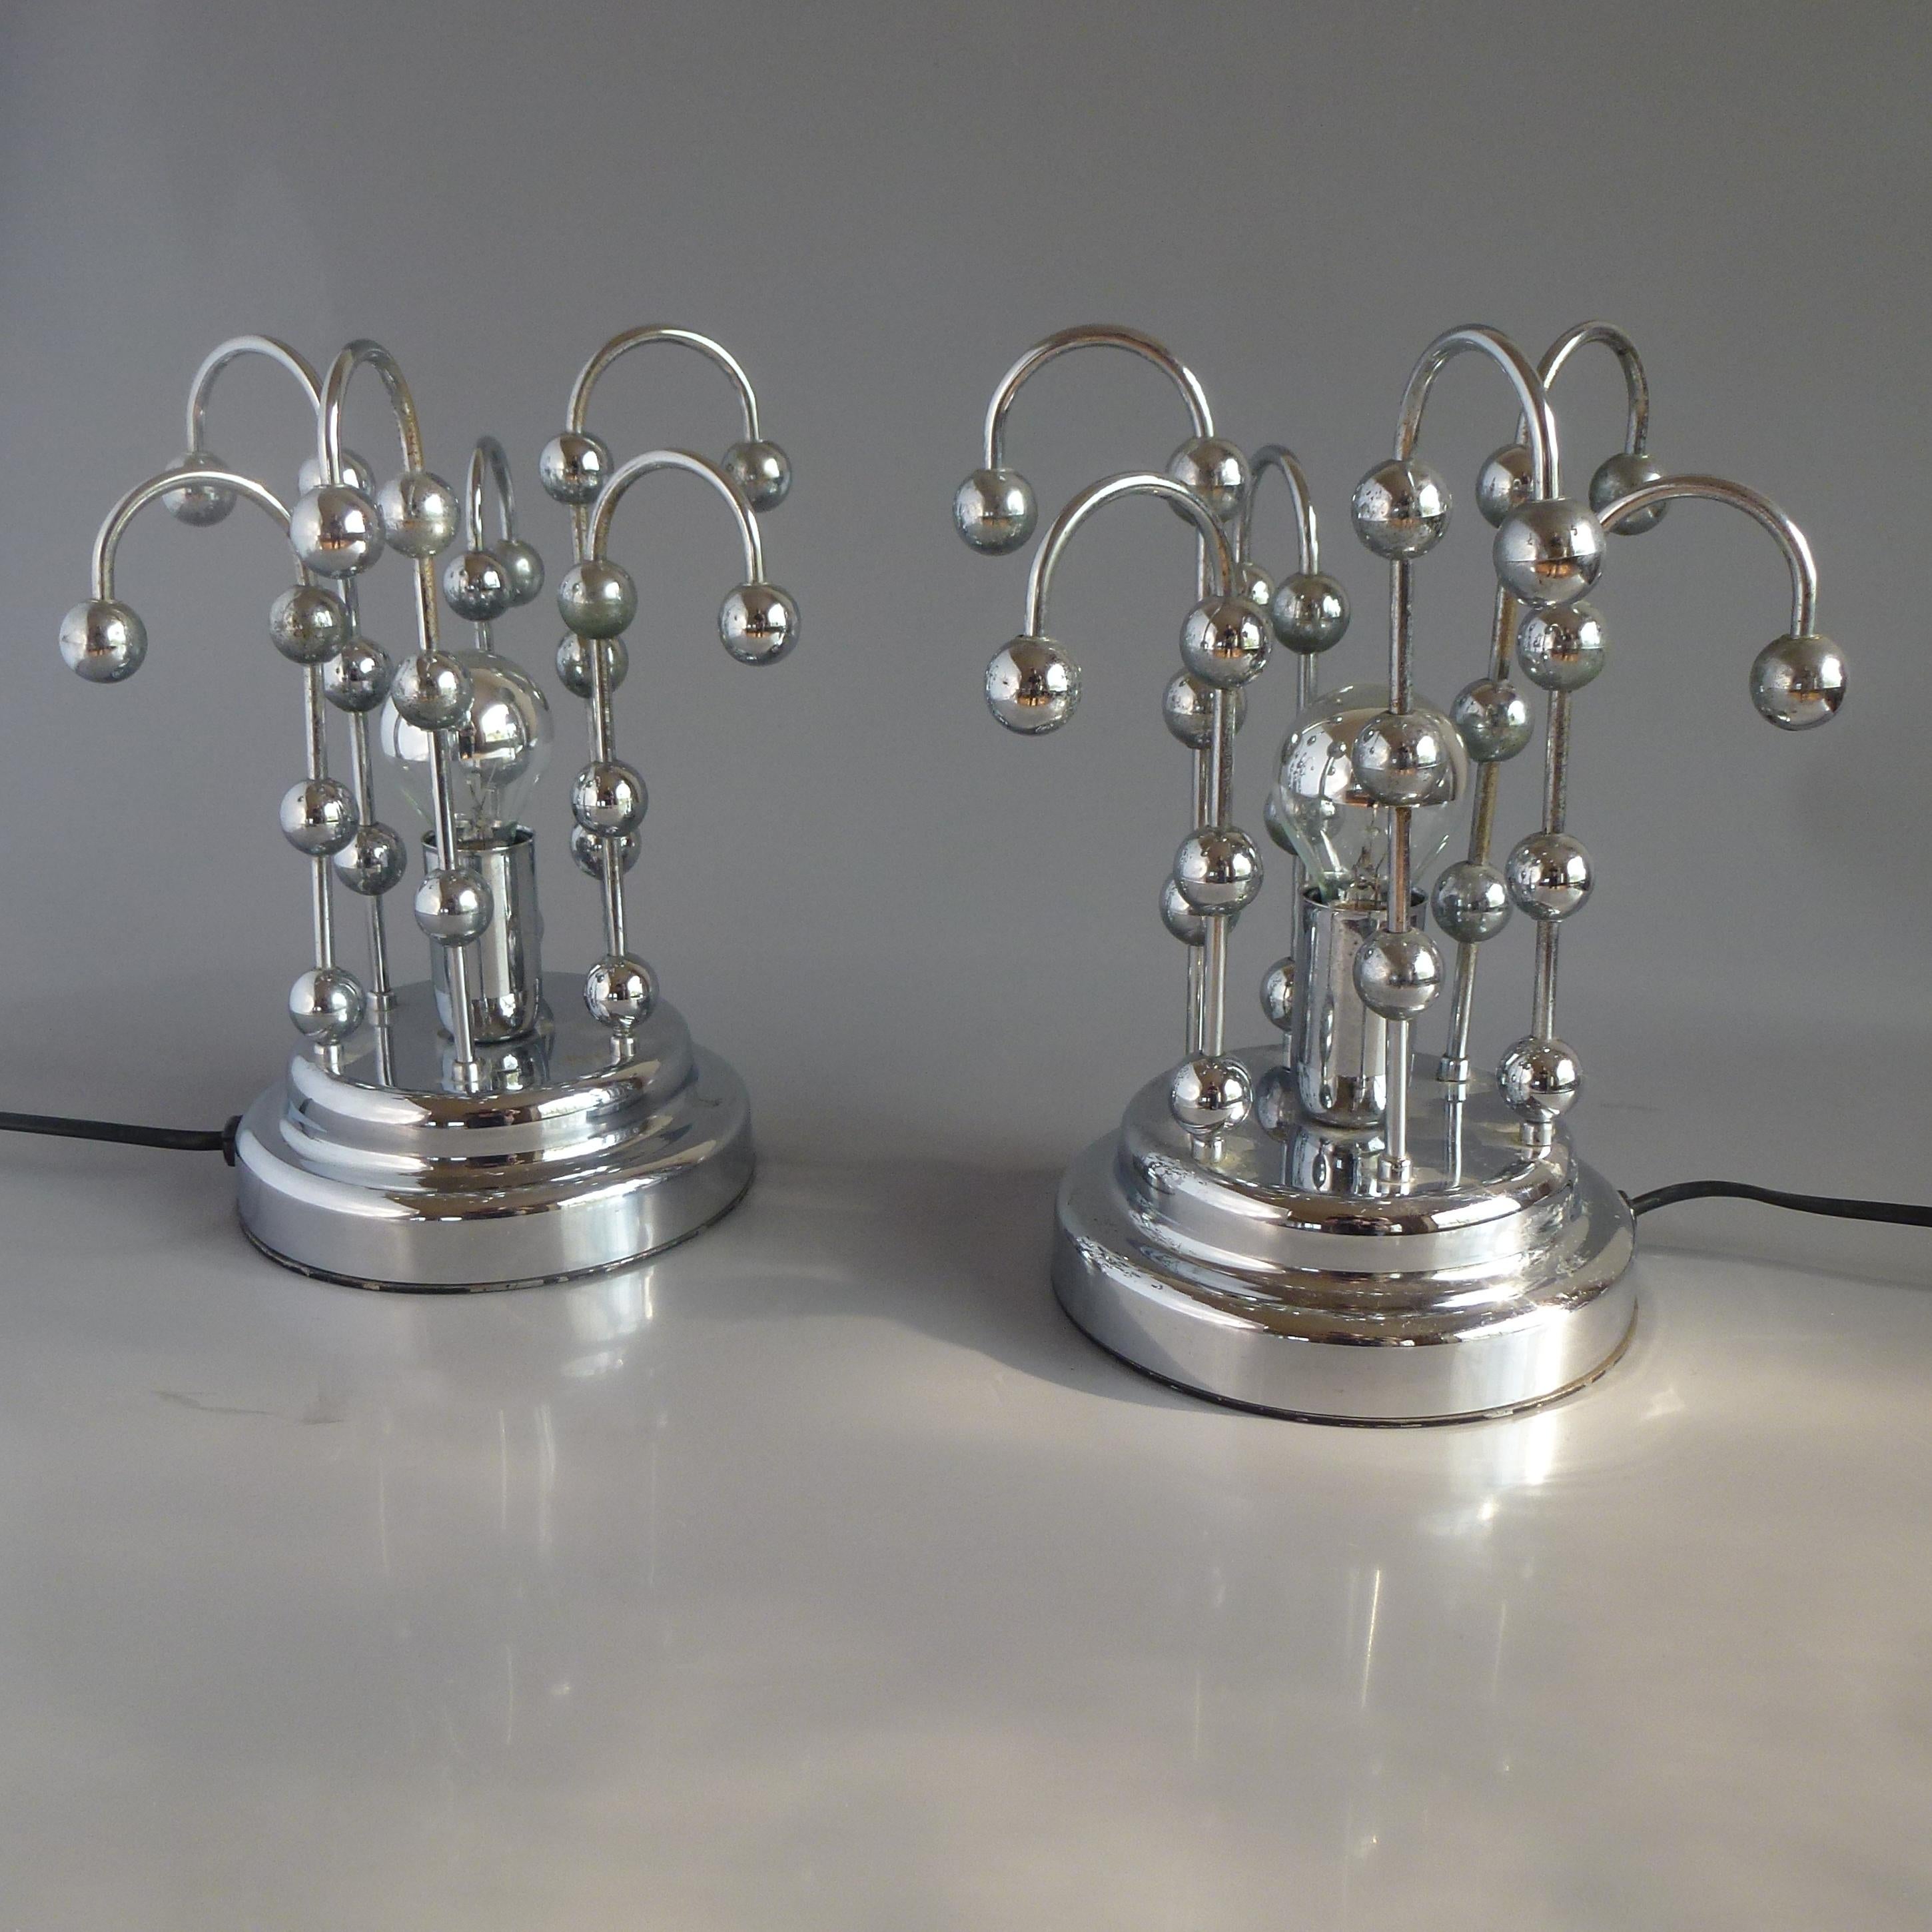 Italian Pair of Mid-Century Space Age Chrome Table or Nightstand Lamps, Italy, 1960s For Sale